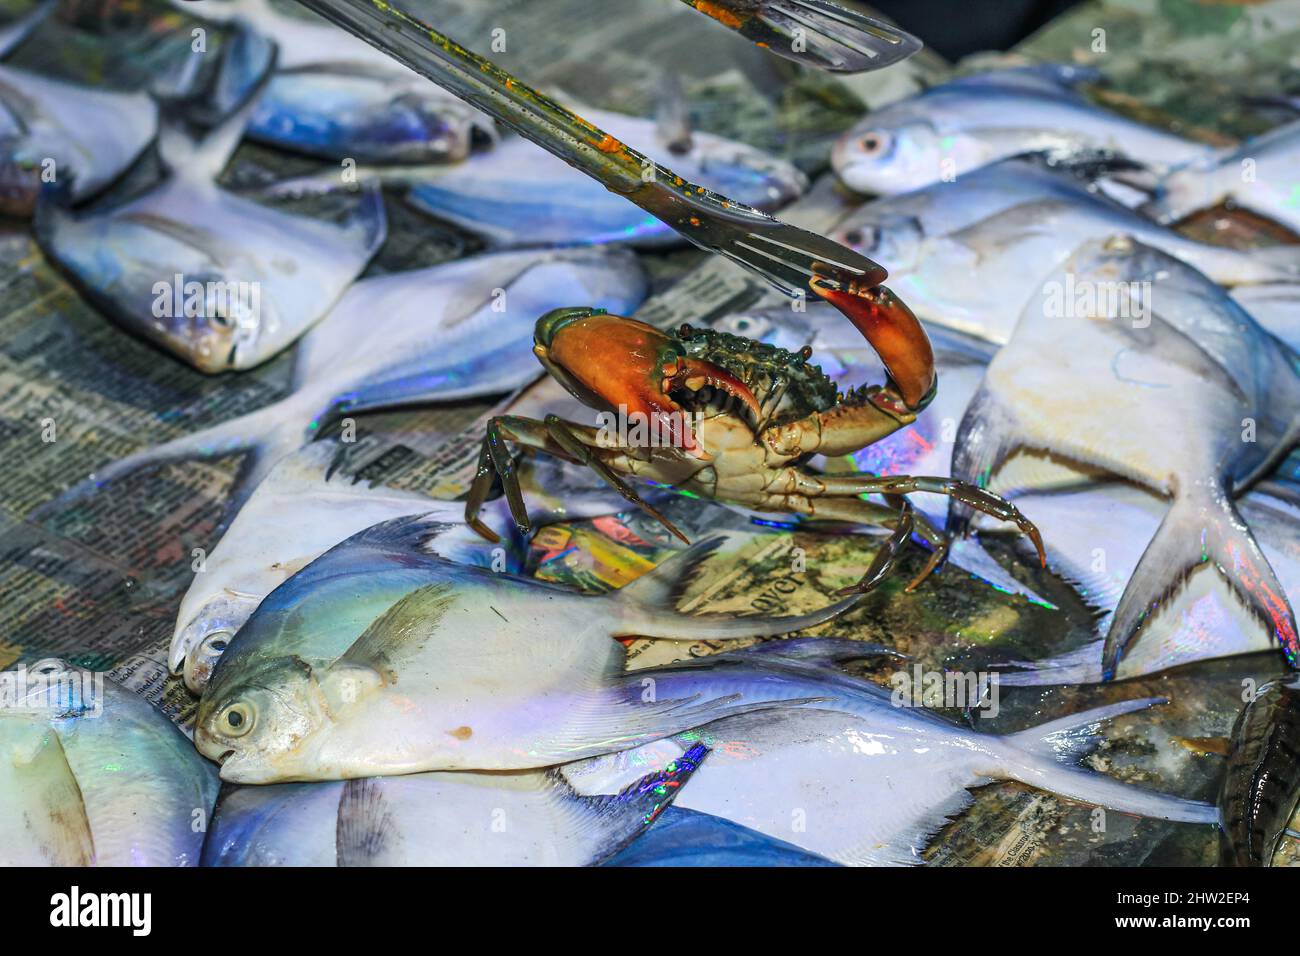 Giant mud crab on a tray. Closeup fresh bubble crab (Scylla Serrata) Common name Black Crab, Mangrove Crab Rows of crabs tied with straw are sold. Stock Photo